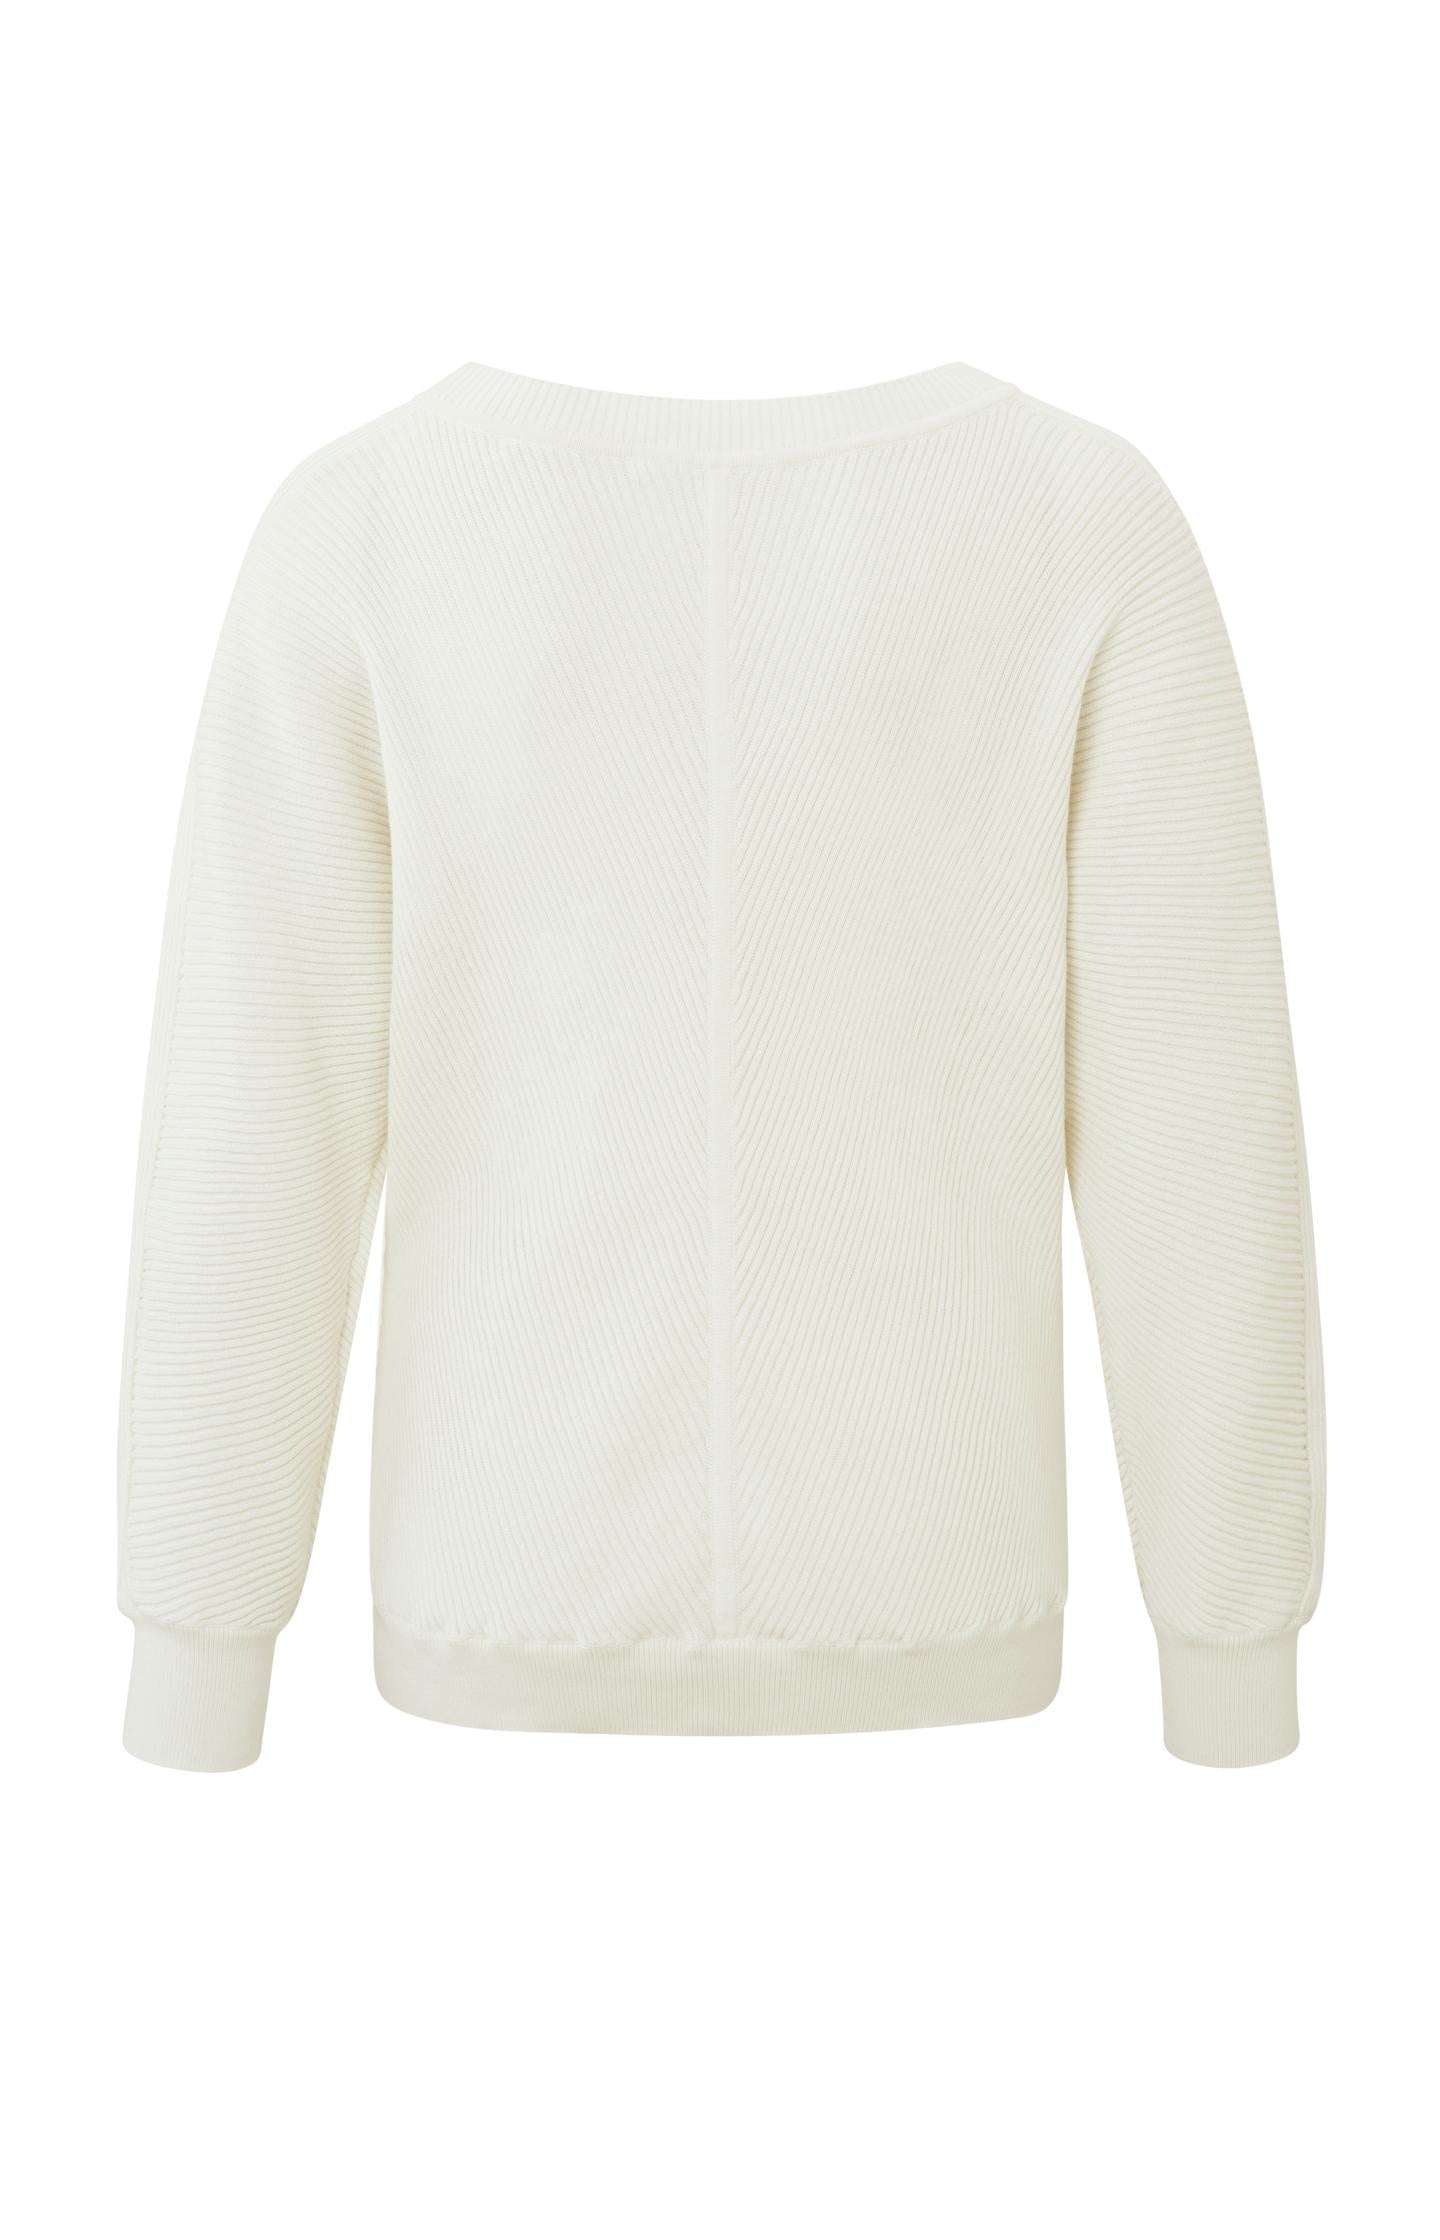 Ribbed sweater with round neck, long sleeves and seam detail